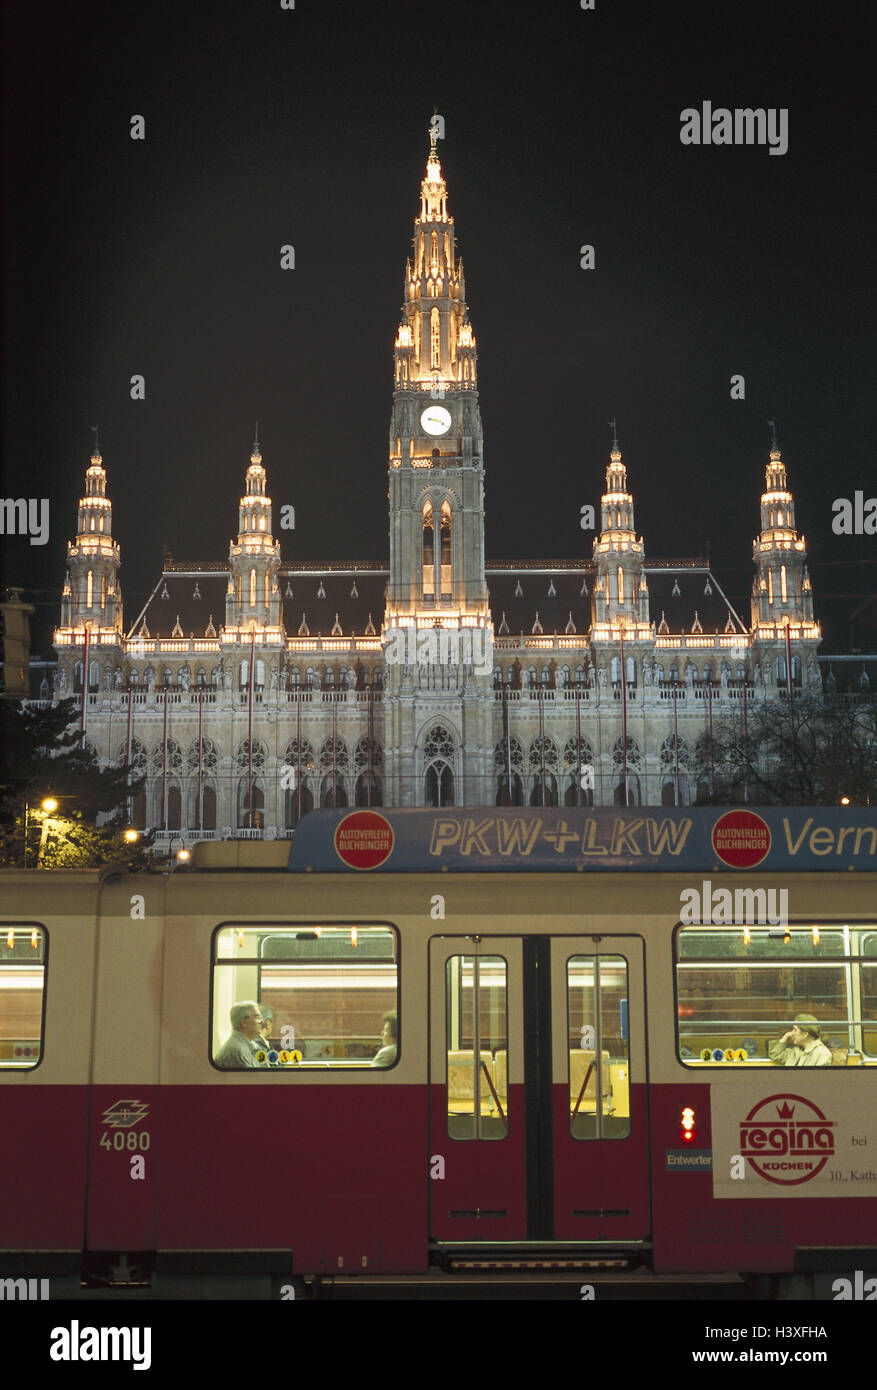 Austria, Vienna, city hall, lighting, detail, streetcar, night, Europe, capital, city hall building, structure, in 1872-83, builder Friedrich von Schmidt, architectural style, architecture, new Gothic, tower height 97.9 m, landmarks, place of interest, culture, means transportation, publicly, tram, transportation human beings, traffic, rail transport, trajectory traffic, trajectory, evening Stock Photo